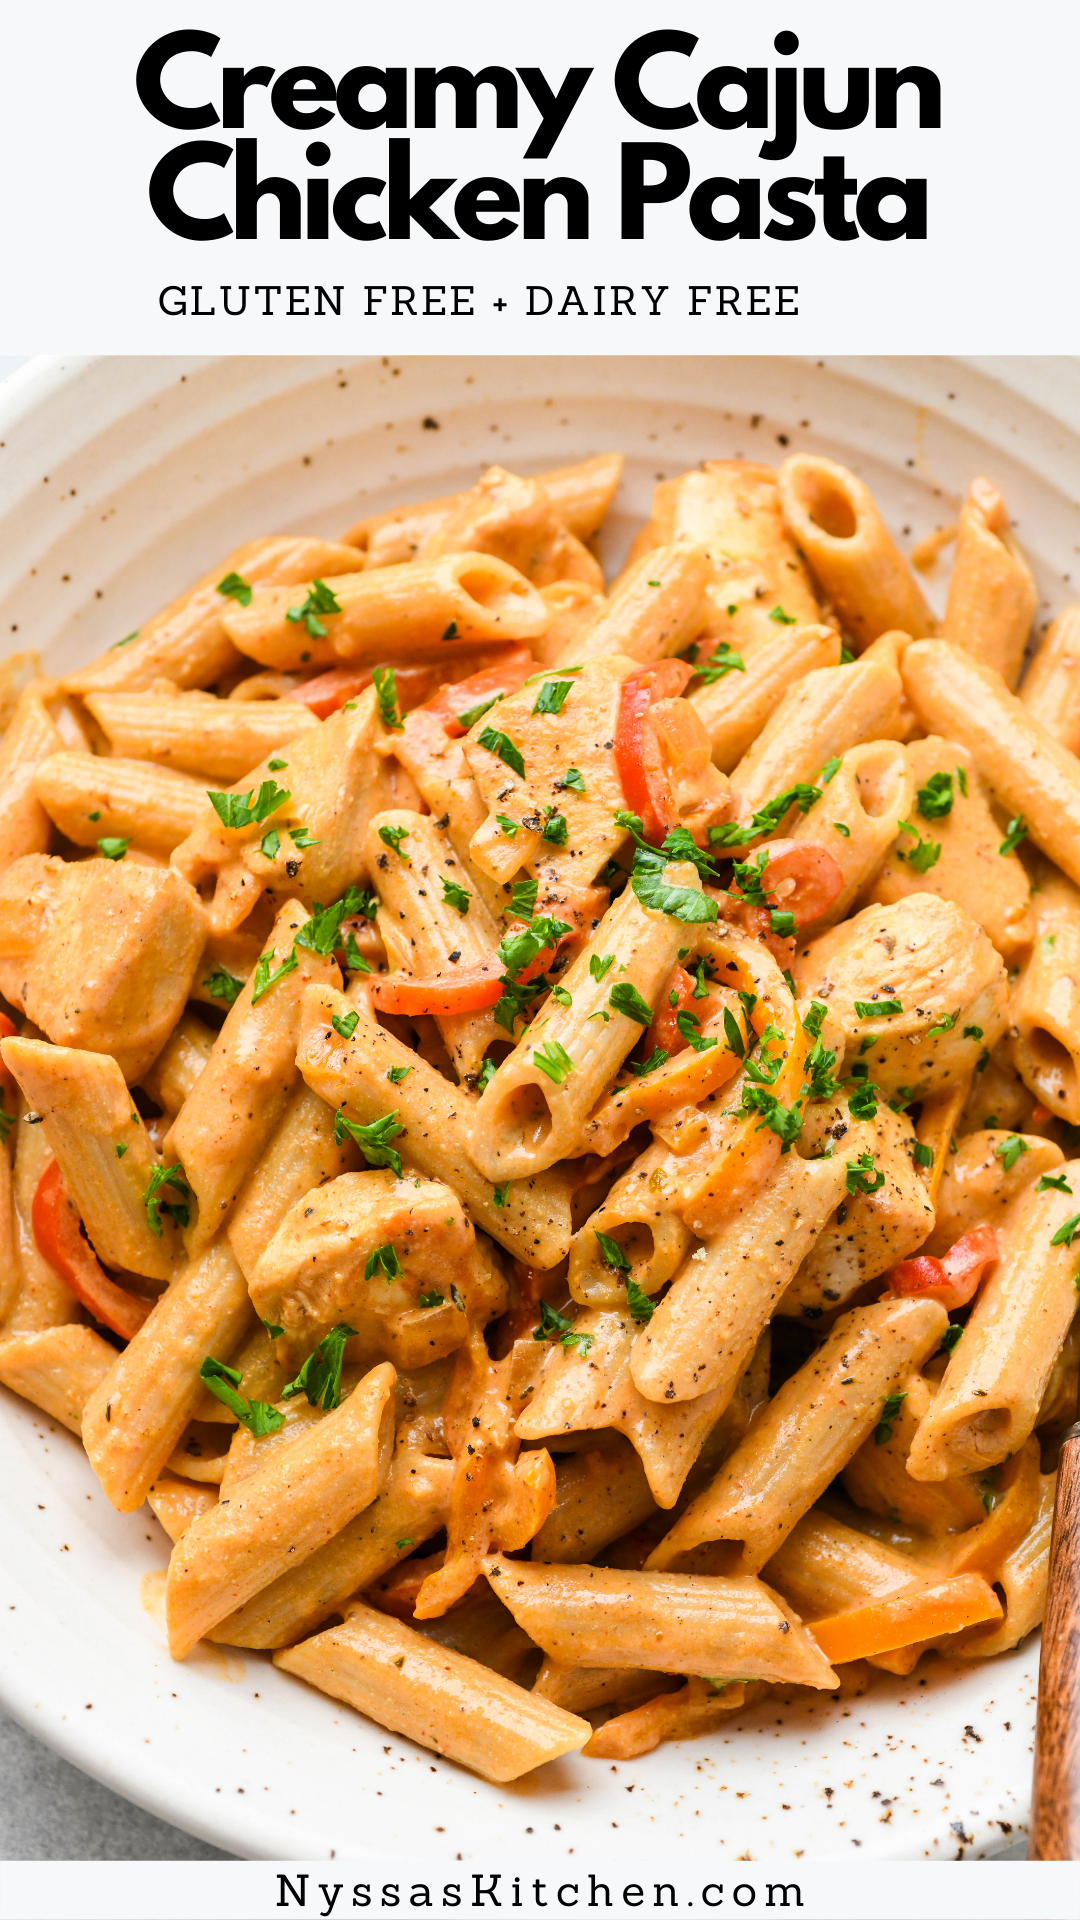 Dairy free and gluten free, this creamy cajun chicken pasta is a lightened up version of a comfort food classic! A cozy recipe that's perfect for any night of the week that's healthy and full of zesty Cajun flavor. Gluten free, dairy free, vegan option.